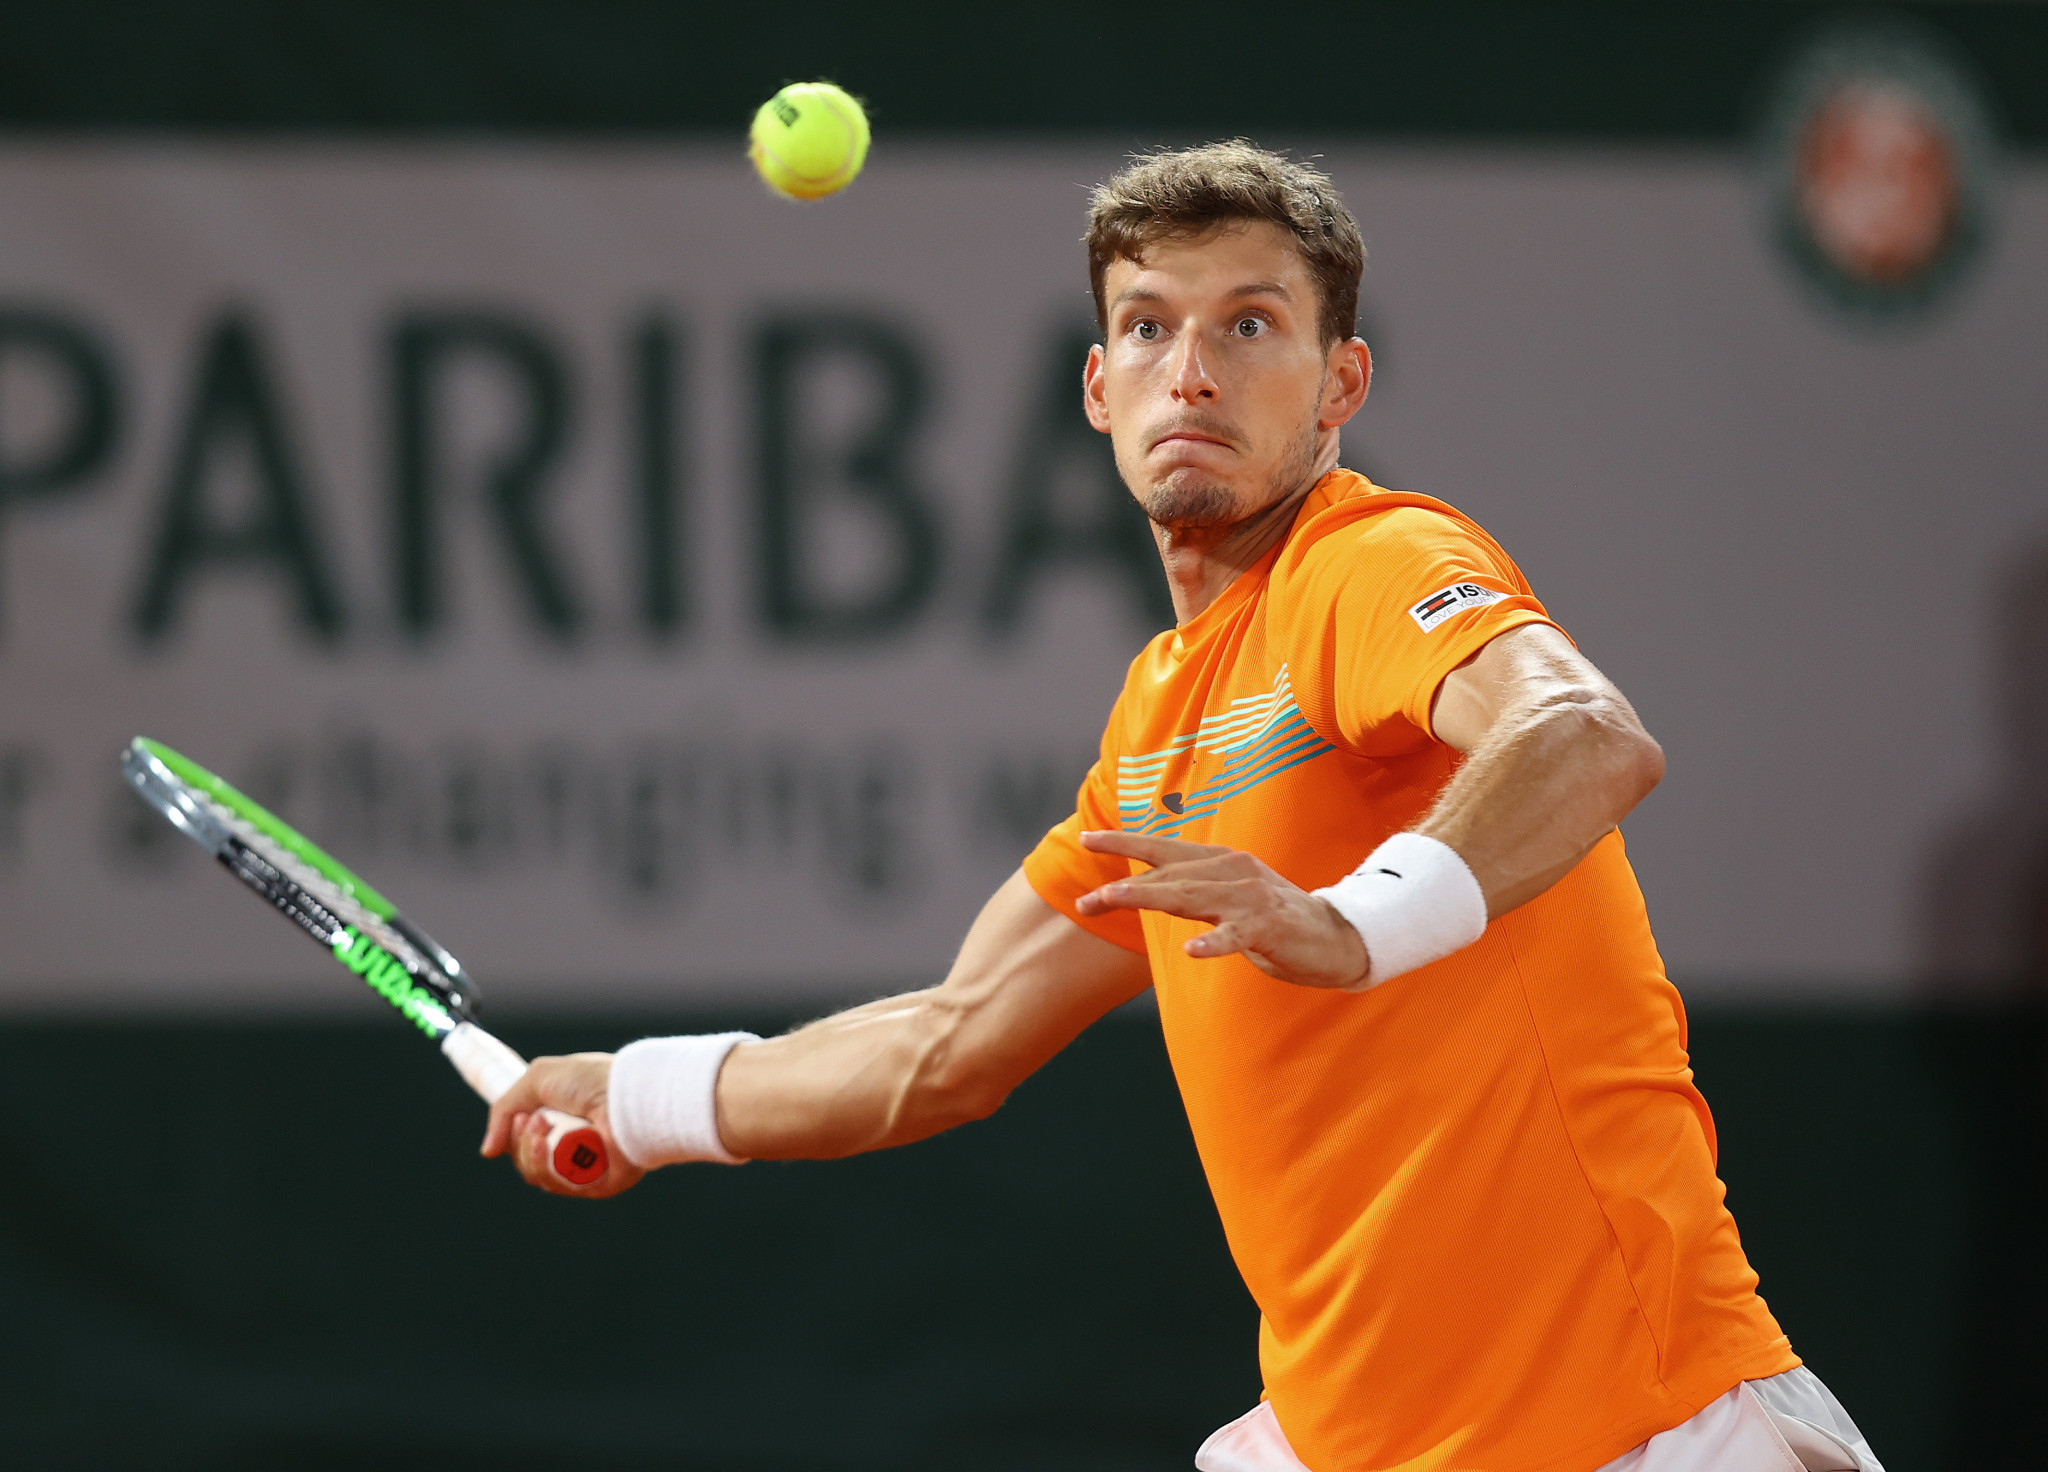 Pablo Carreno Busta will face Djokovic in the French Open quarter-finals - a replay of a match-up which saw the world number one defaulted at the US Open ©Getty Images